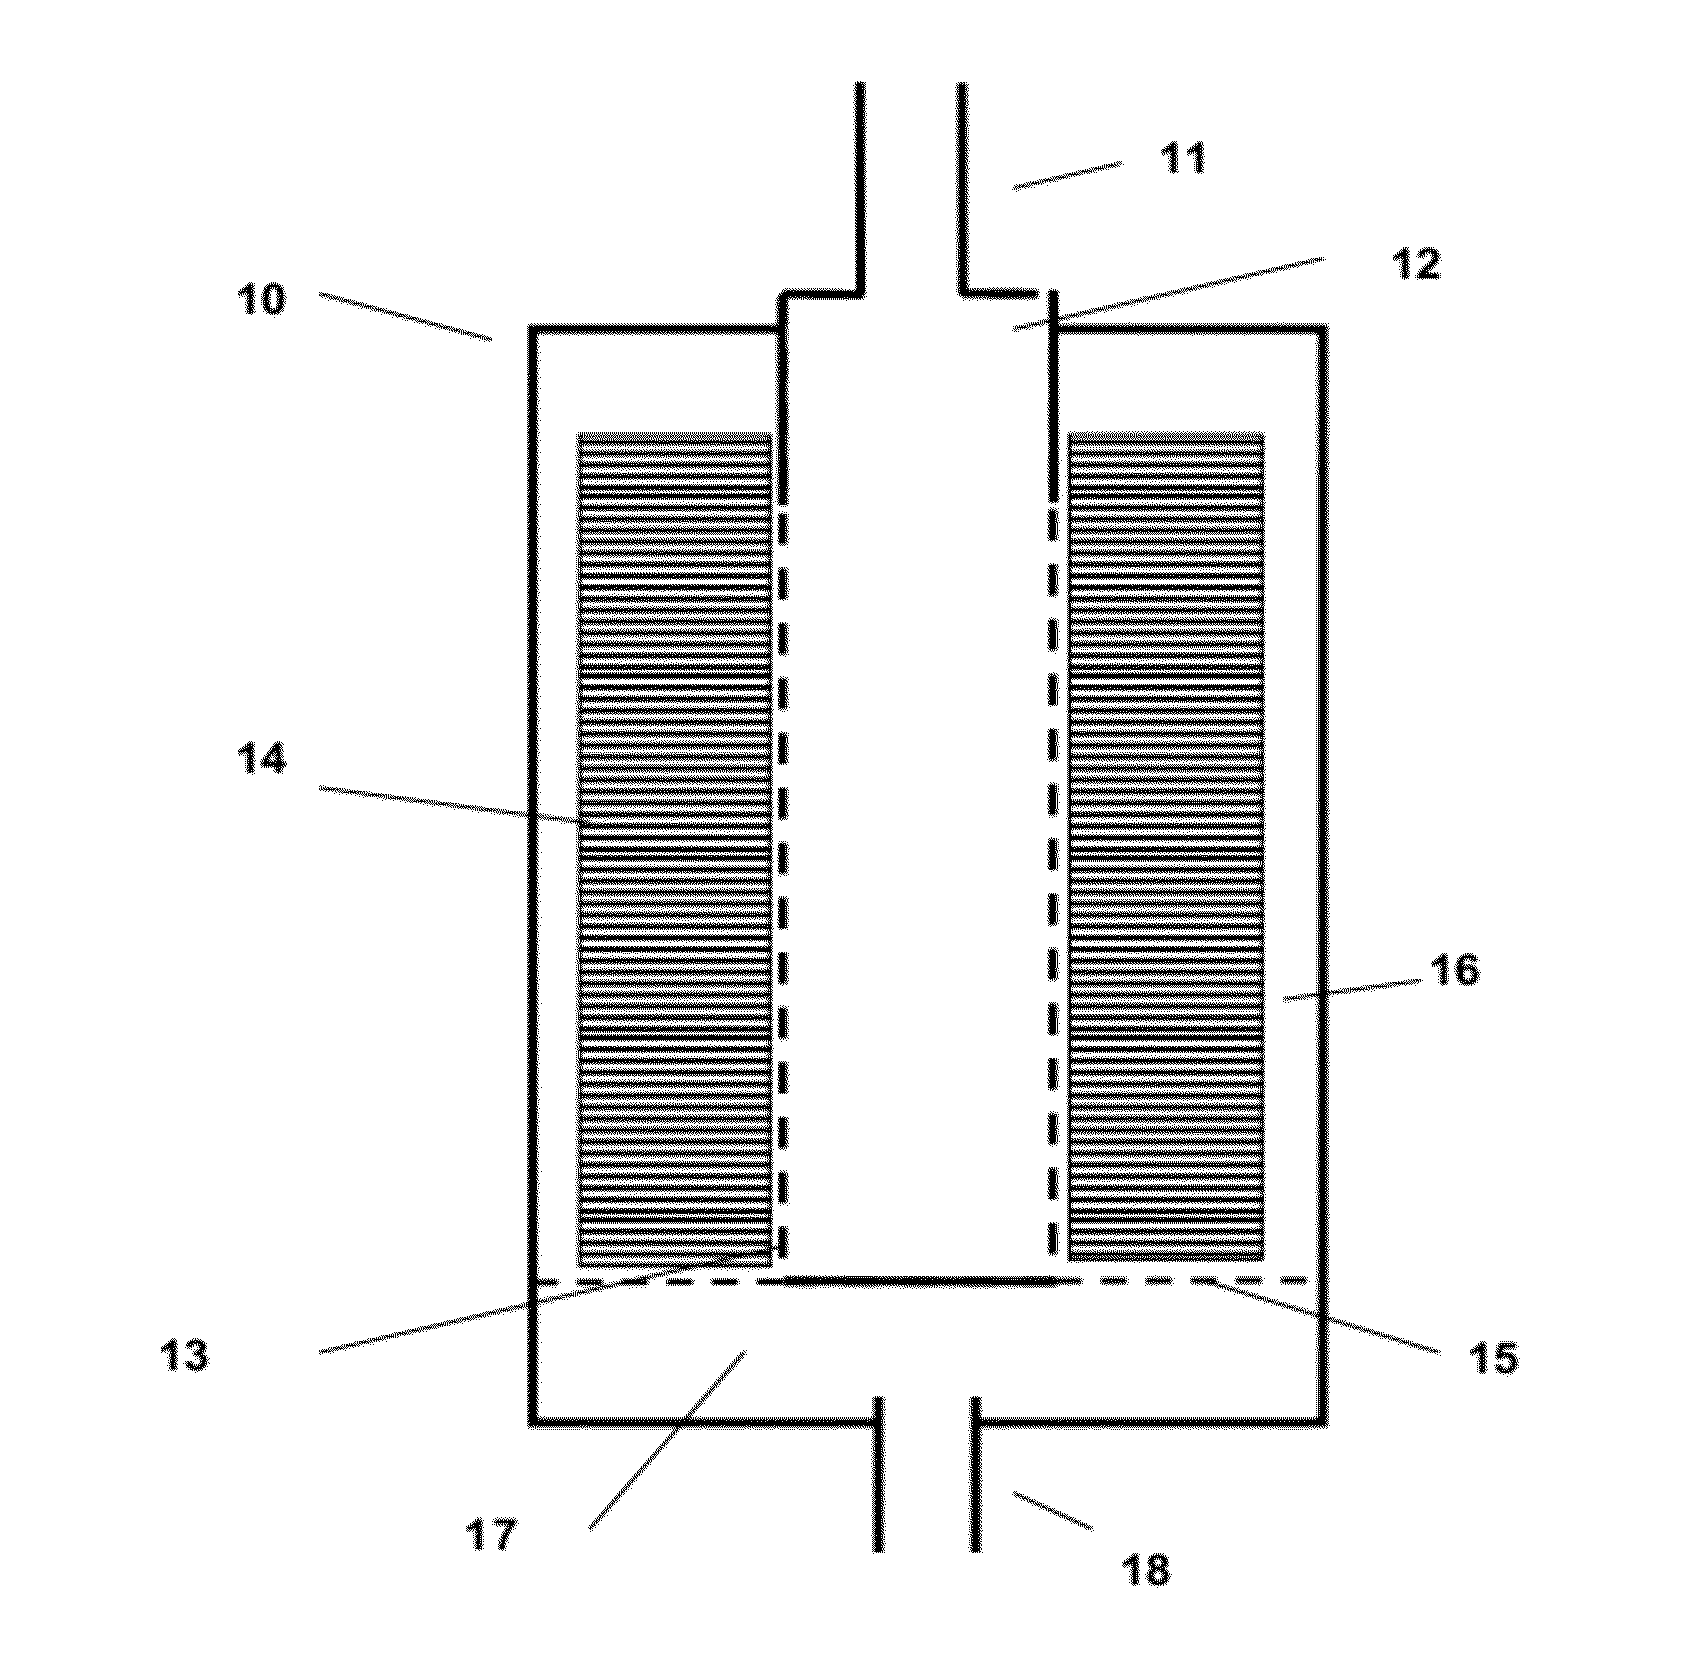 Gas Purification Process Utilizing Engineered Small Particle Adsorbents